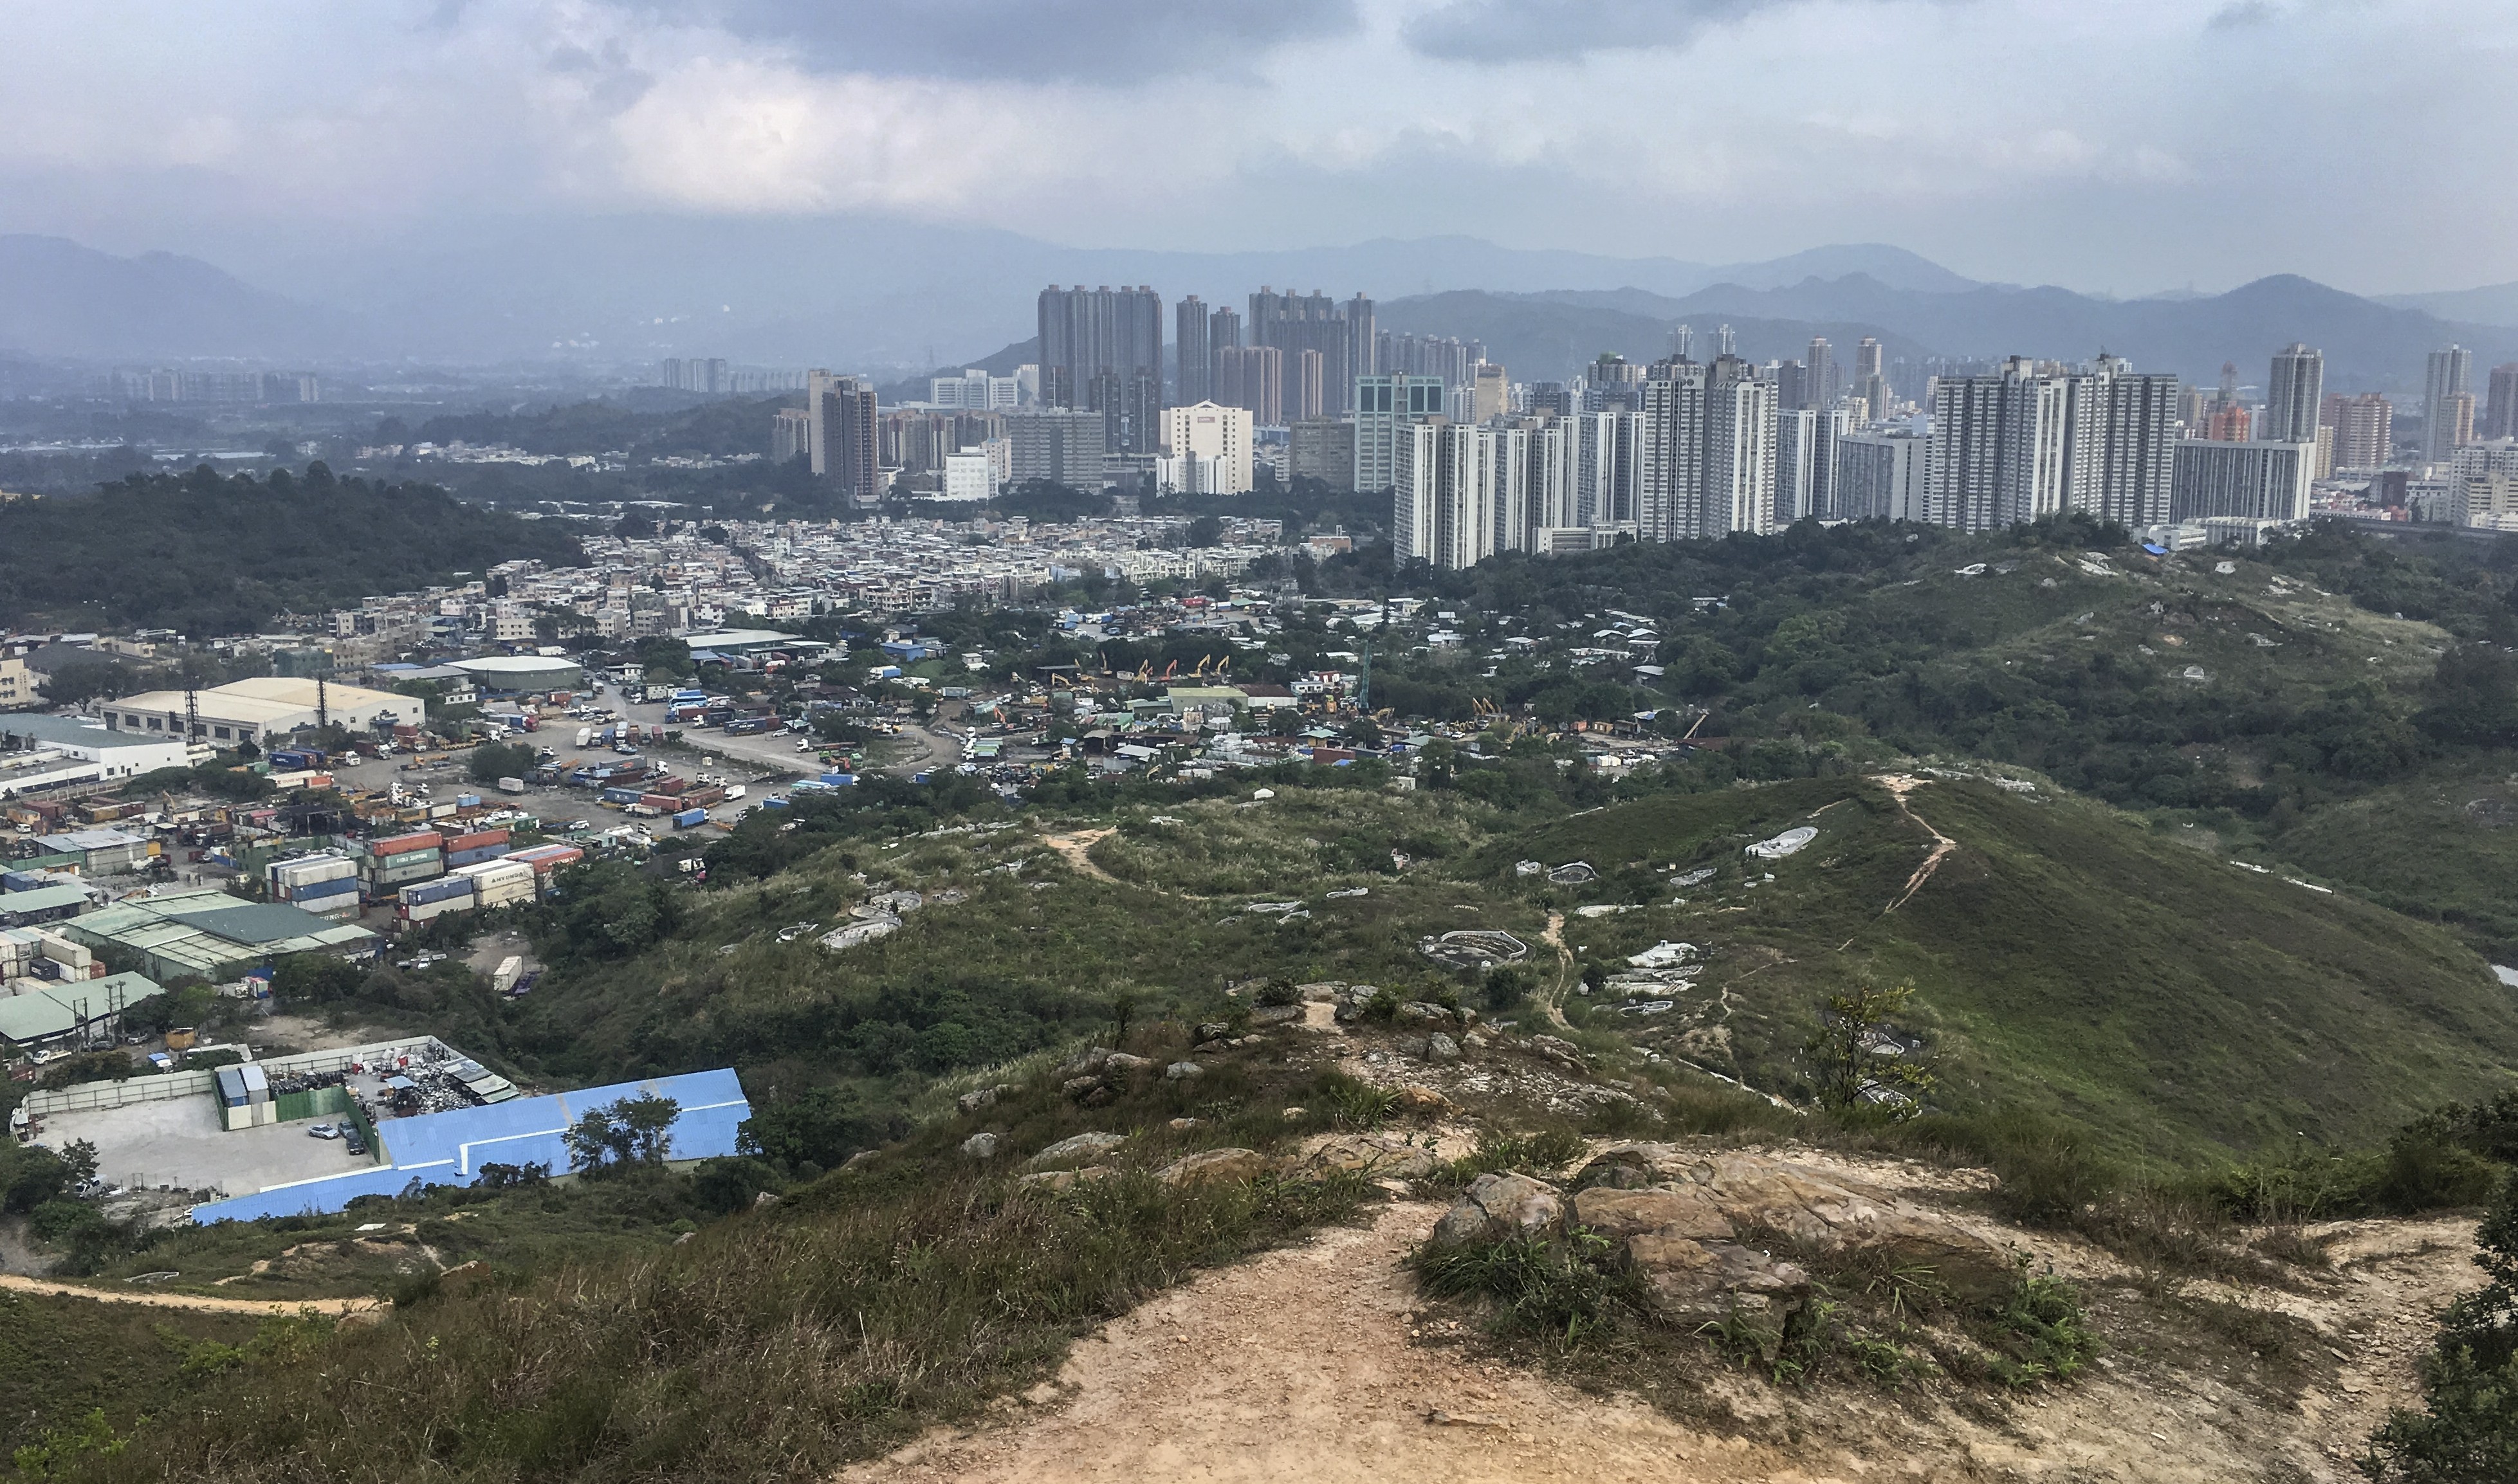 The Wang Chau development in Yuen Long is expected to be completed by 2025-26, yielding 4,000 units for a population of about 12,300. Photo: Martin Chan